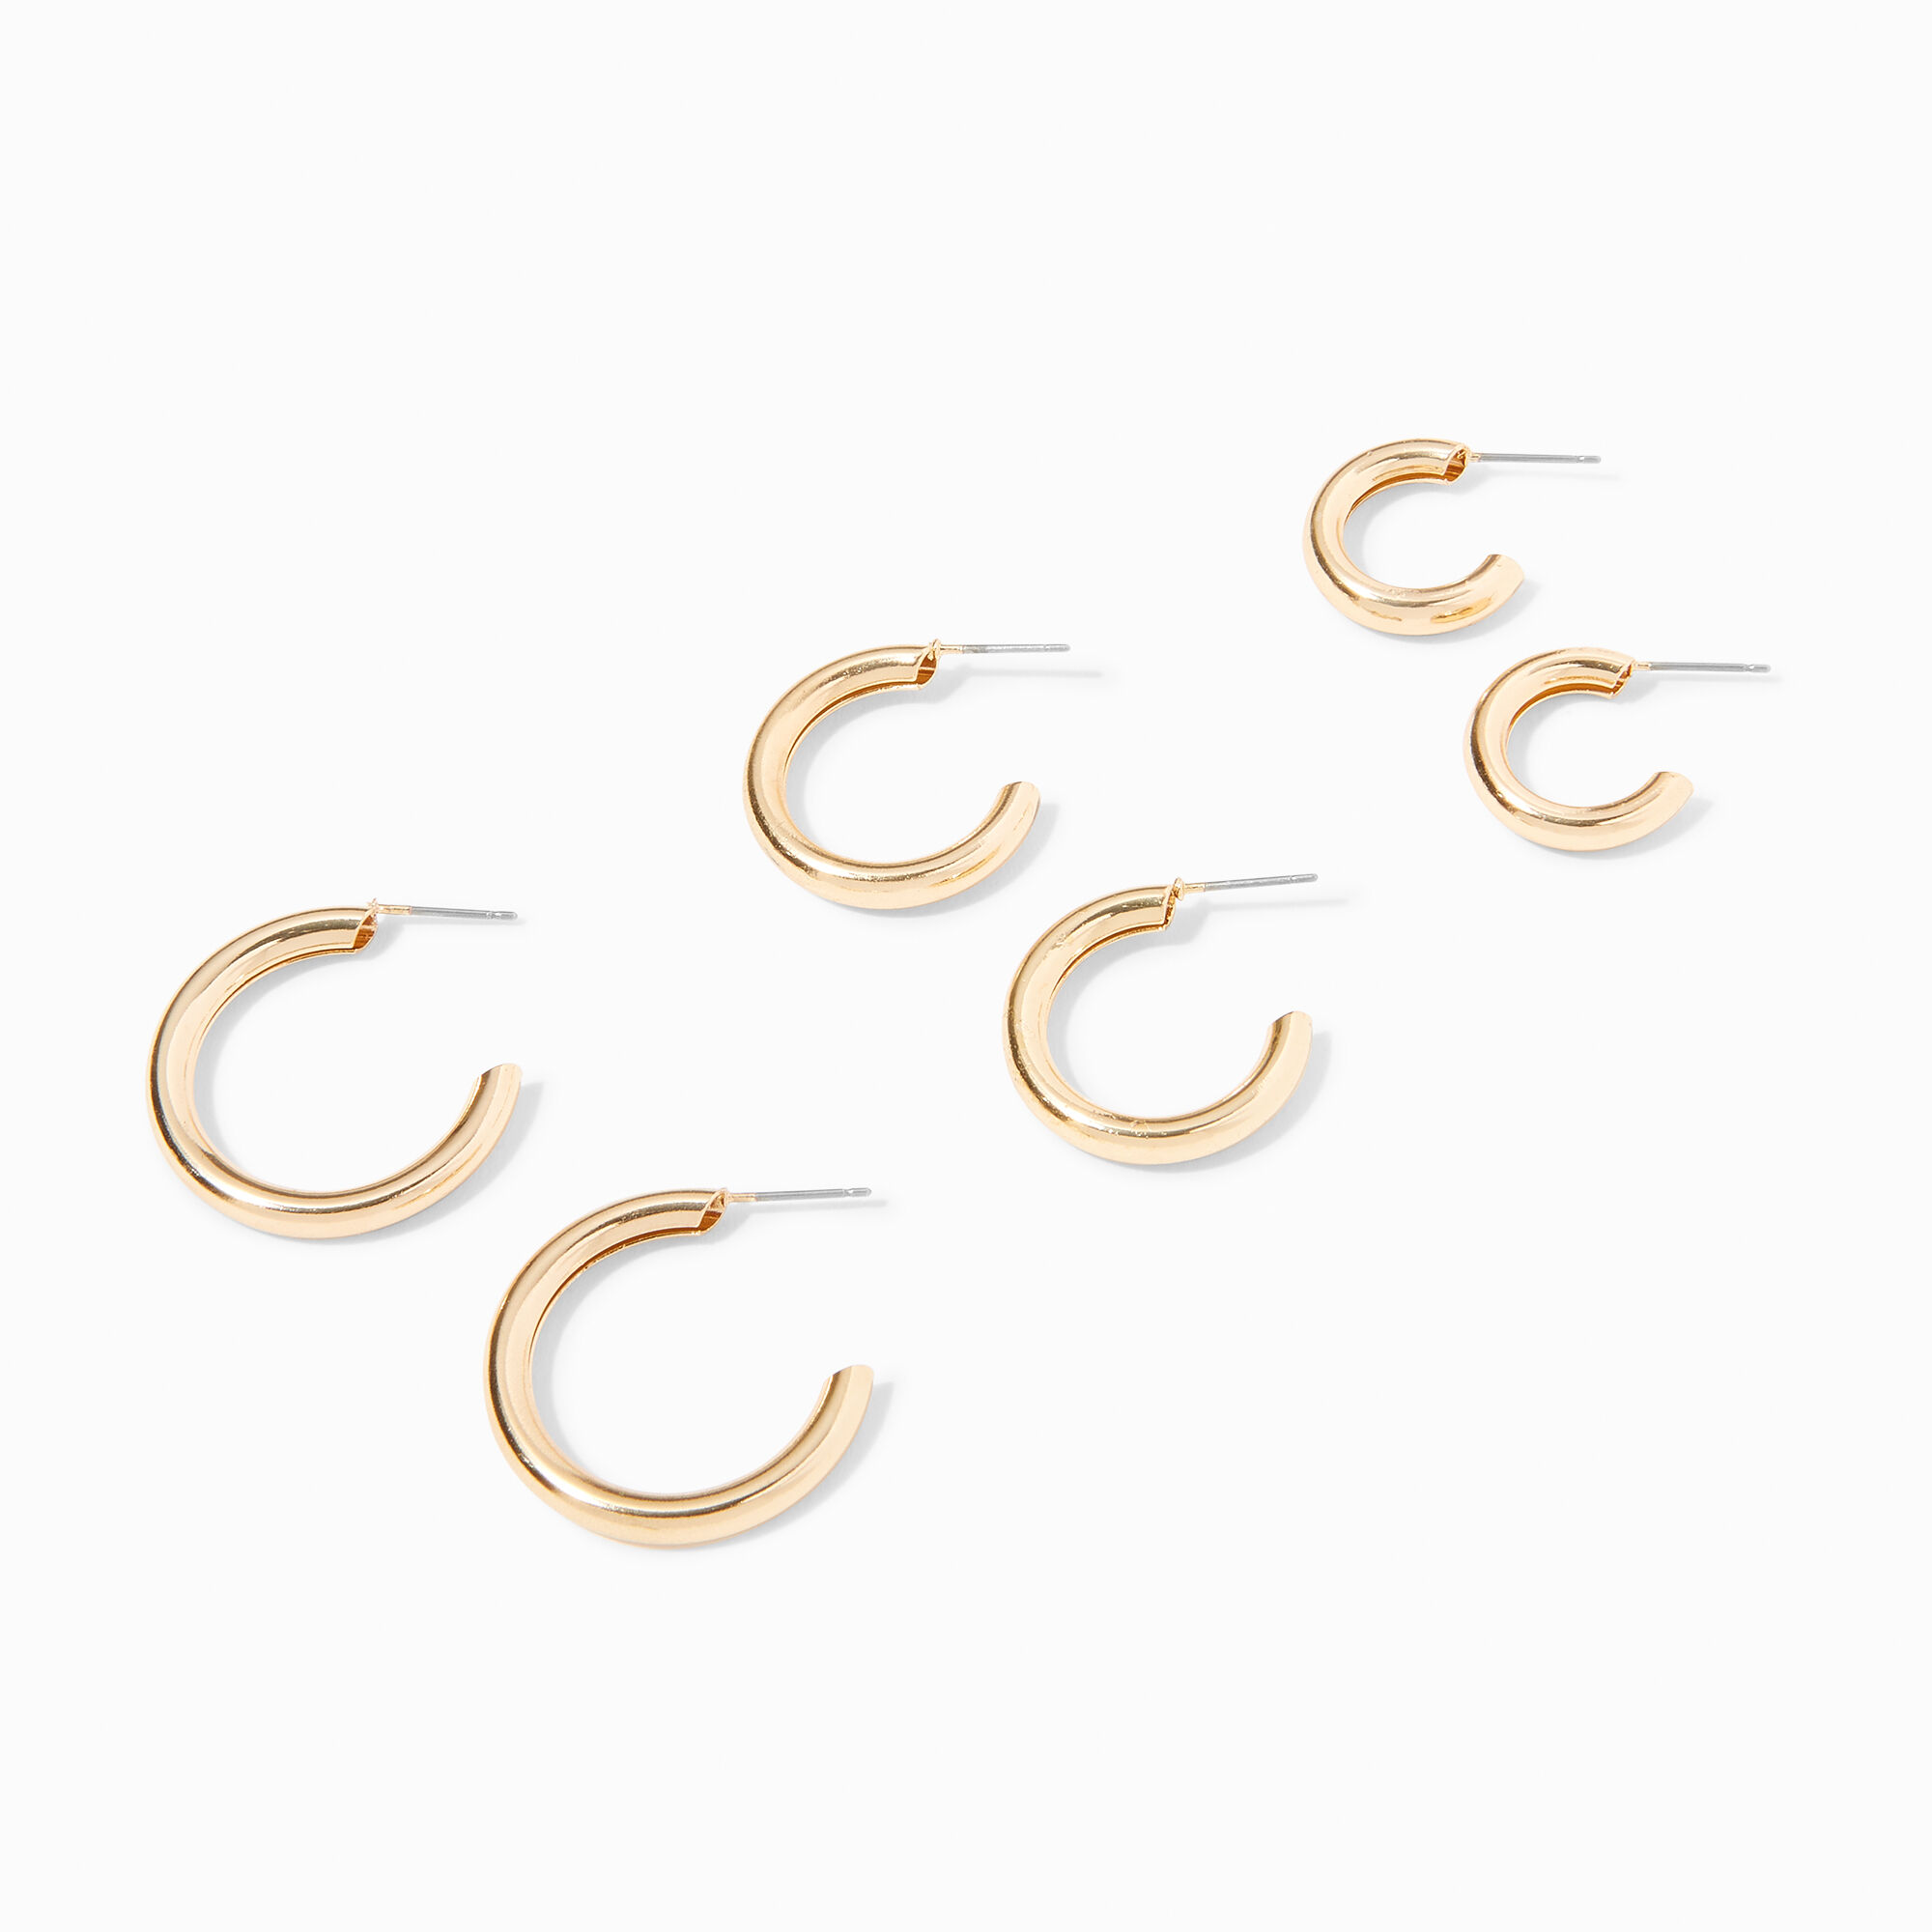 View Claires Tone Graduated Hoop Earrings 3 Pack Gold information